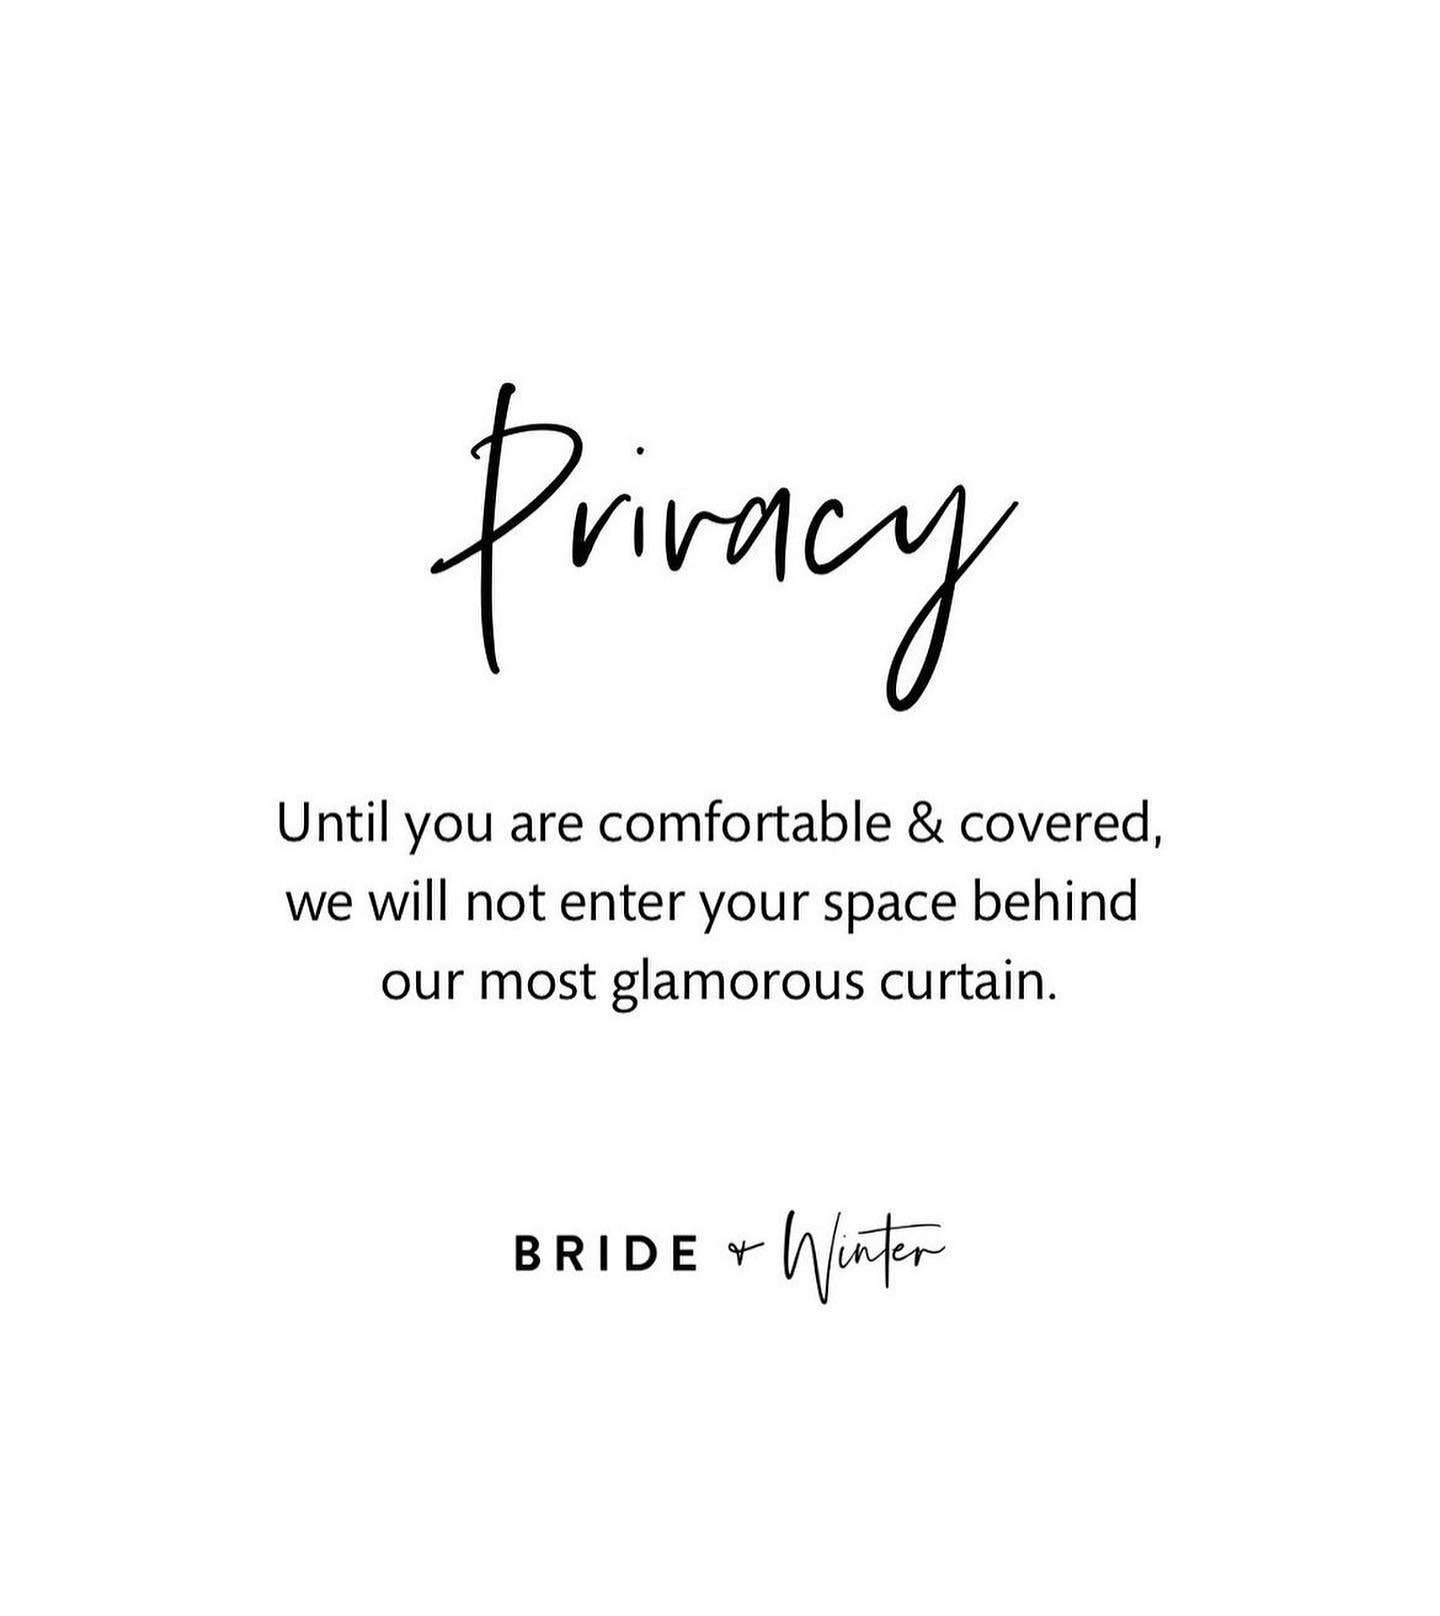 We will never see you naked! Your lady bits 🍉🍉🍑are yours &amp; yours alone. Your curtain. Your space. 
⠀⠀⠀⠀⠀⠀⠀⠀⠀
There&rsquo;s enough going on when it comes to wedding dress shopping so we&rsquo;re sure as hell not going to add to any anxiety you 